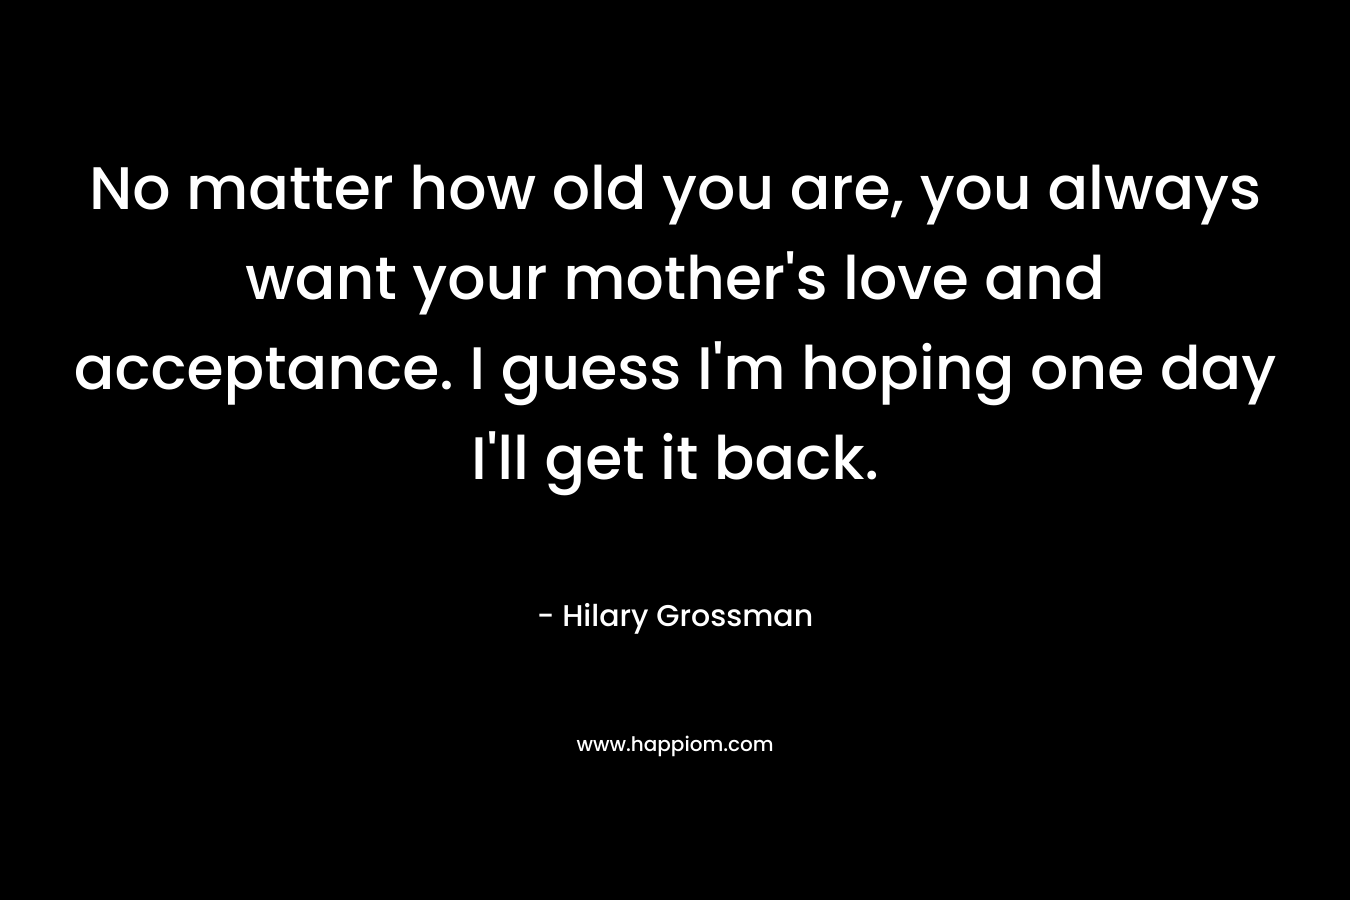 No matter how old you are, you always want your mother's love and acceptance. I guess I'm hoping one day I'll get it back.